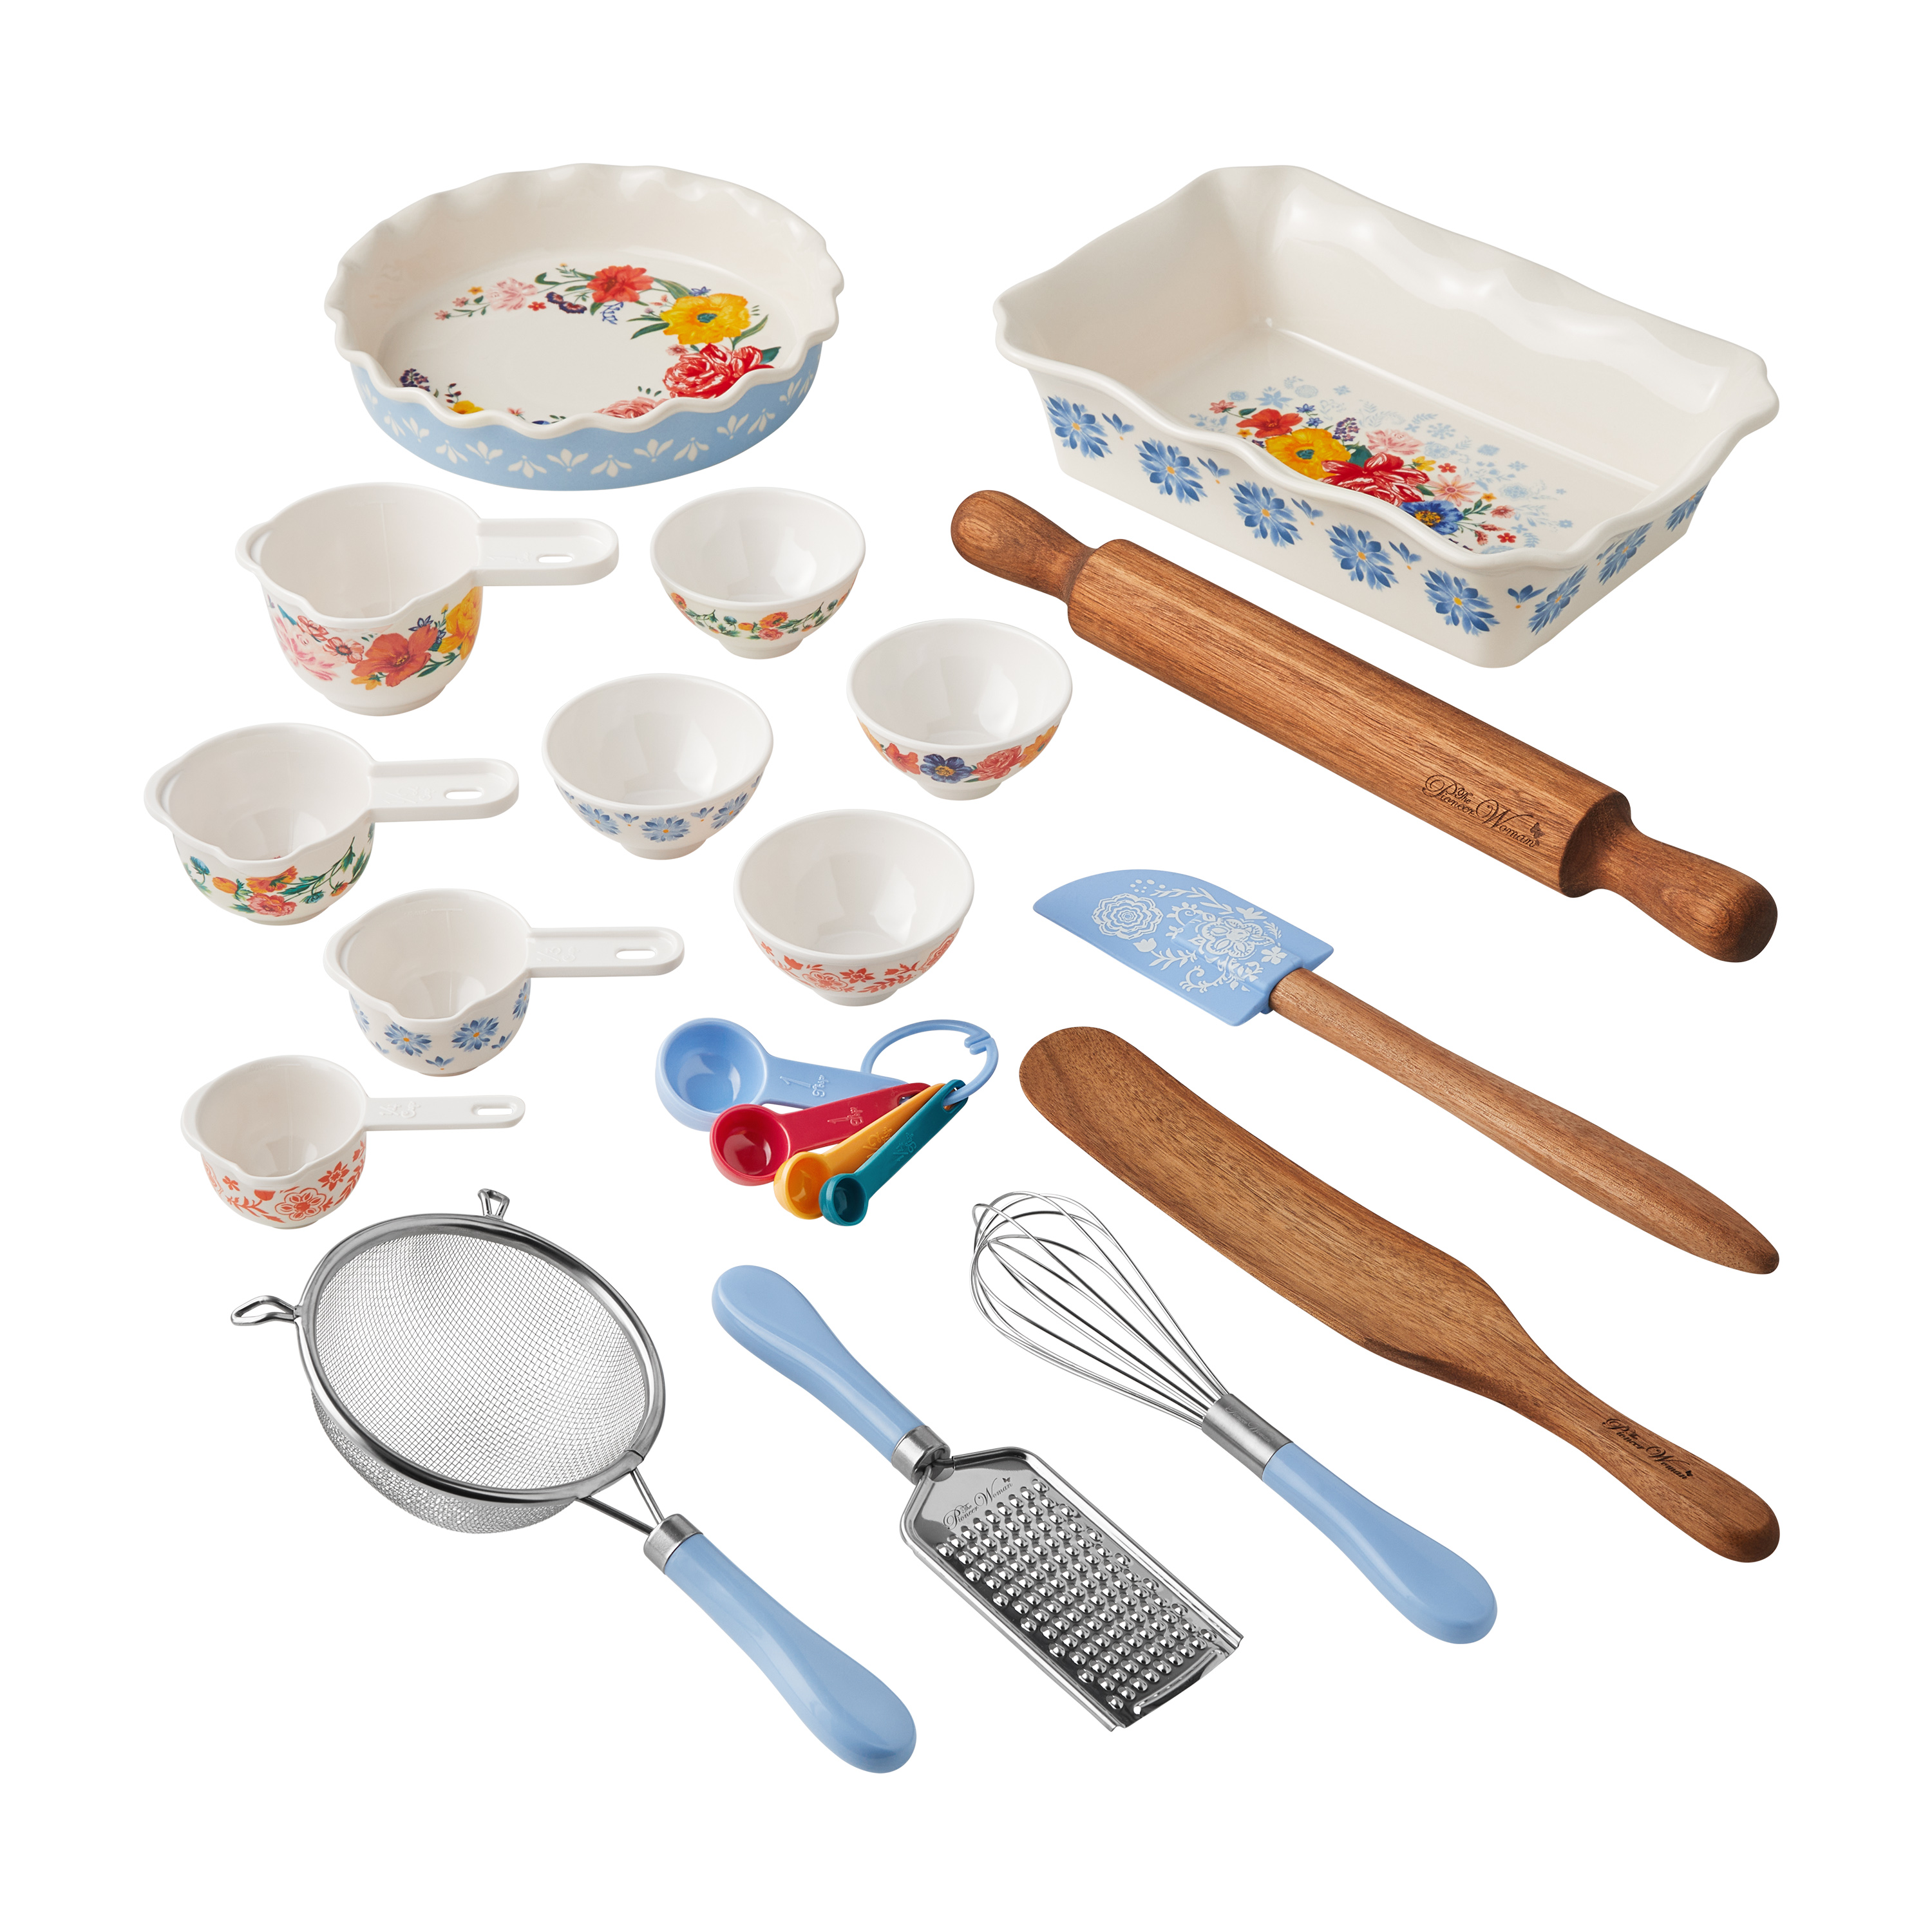 The Pioneer Woman Brilliant Blooms 20-Piece Blue Bake & Prep Set with Baking Dish & Measuring Cups - image 1 of 13